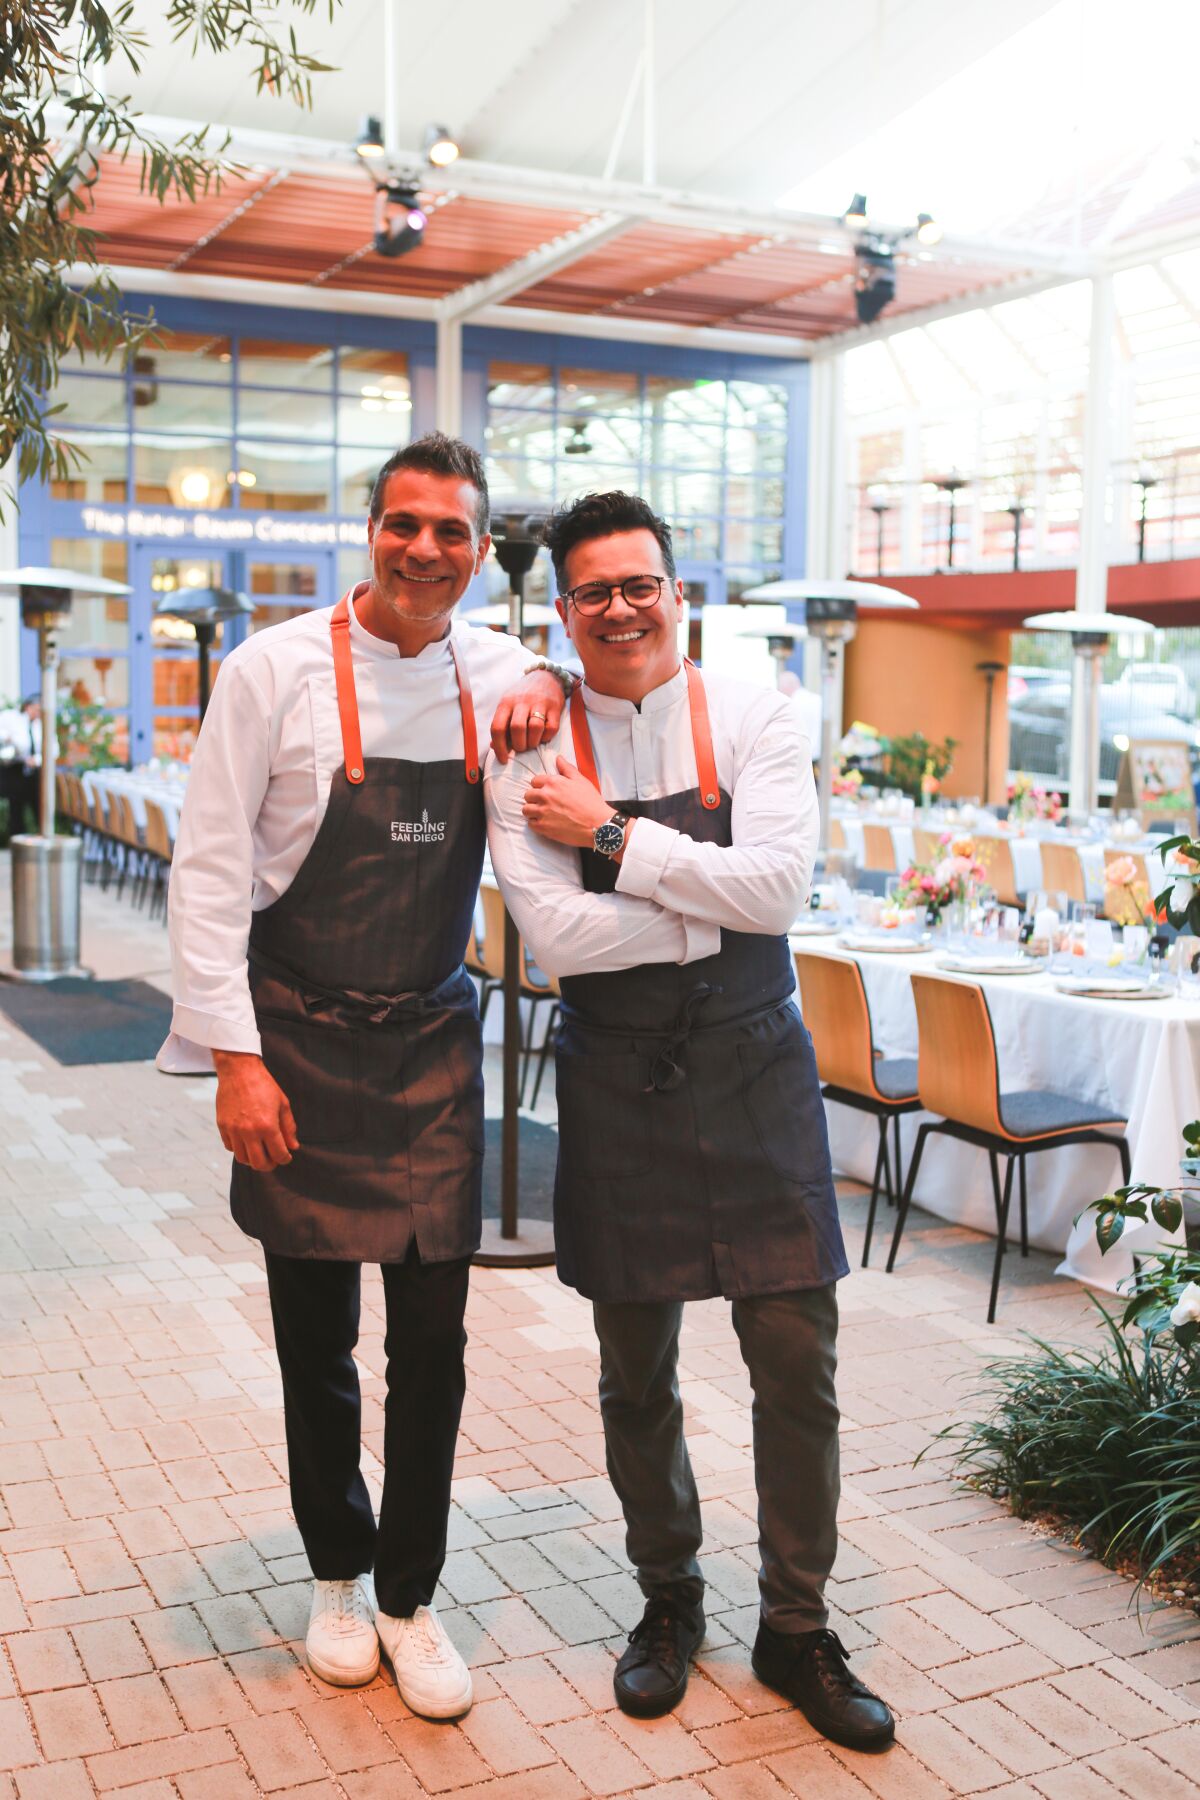 Chefs Angelo Sosa and Ruffo Ibarra at Feeding San Diego's Pairings with a Purpose dinner.